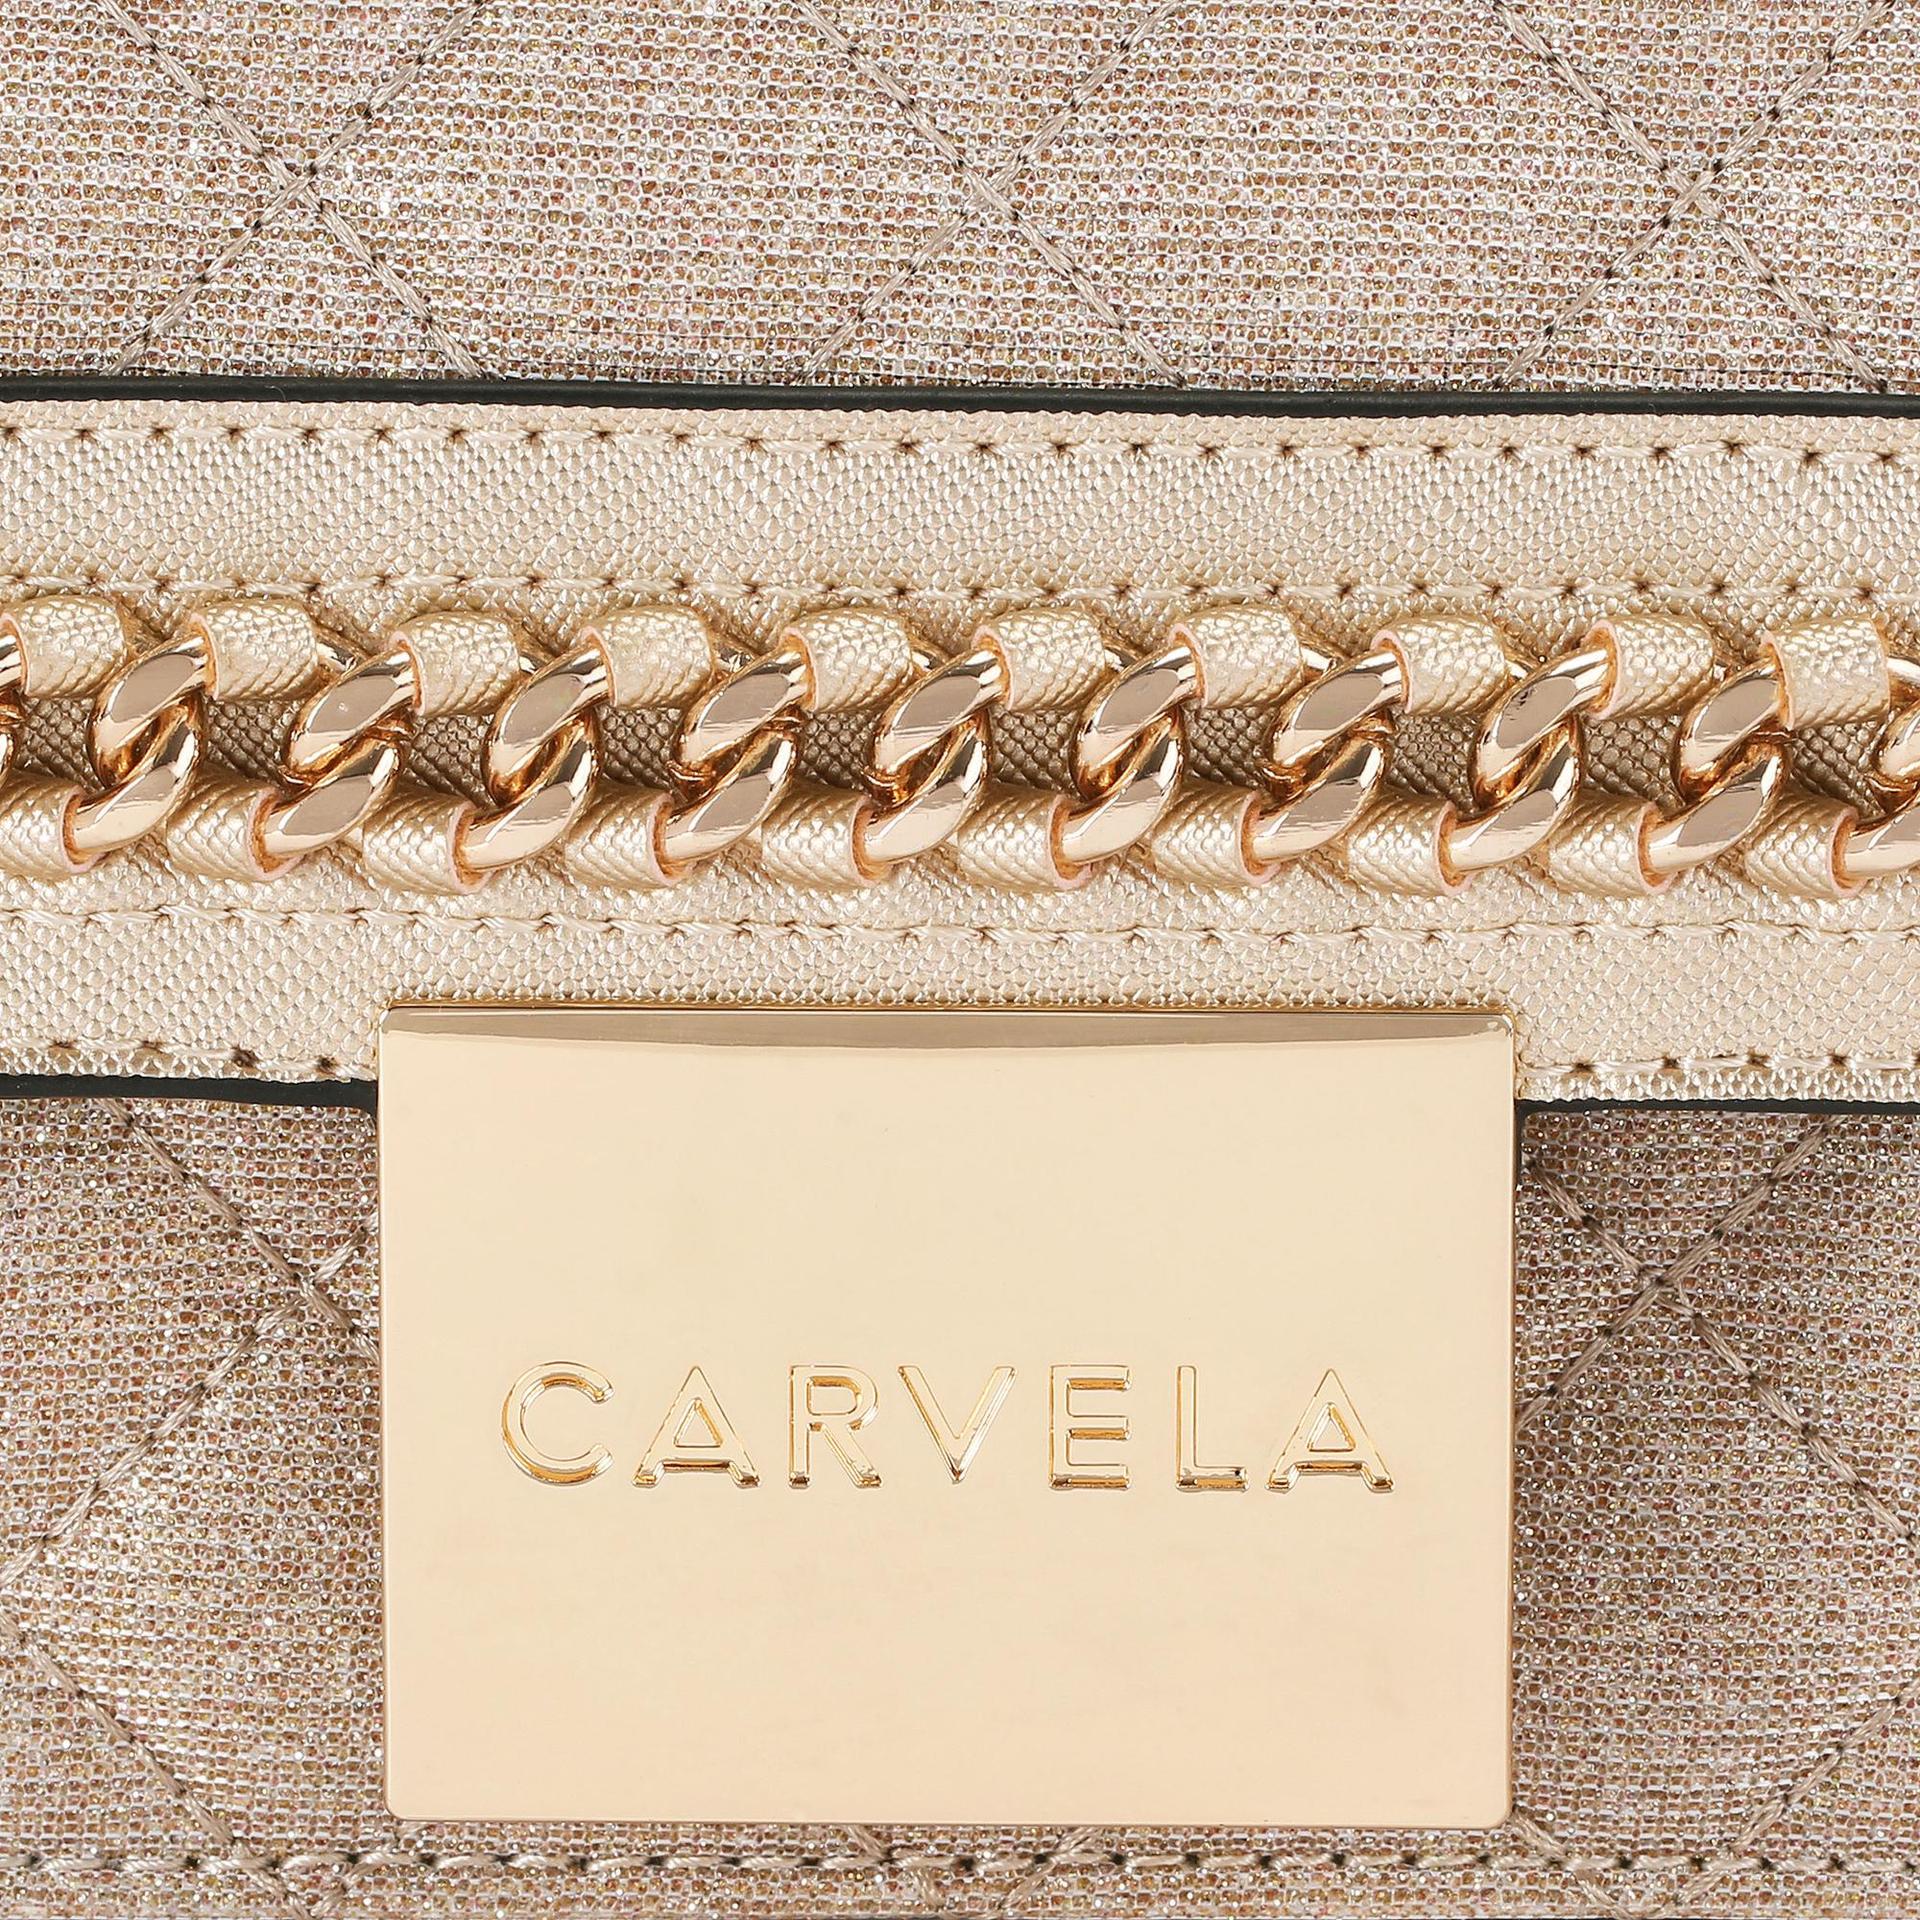 BAILEY QLTD CHN SHLDR BAG Gold Quilted Chain Bag by CARVELA